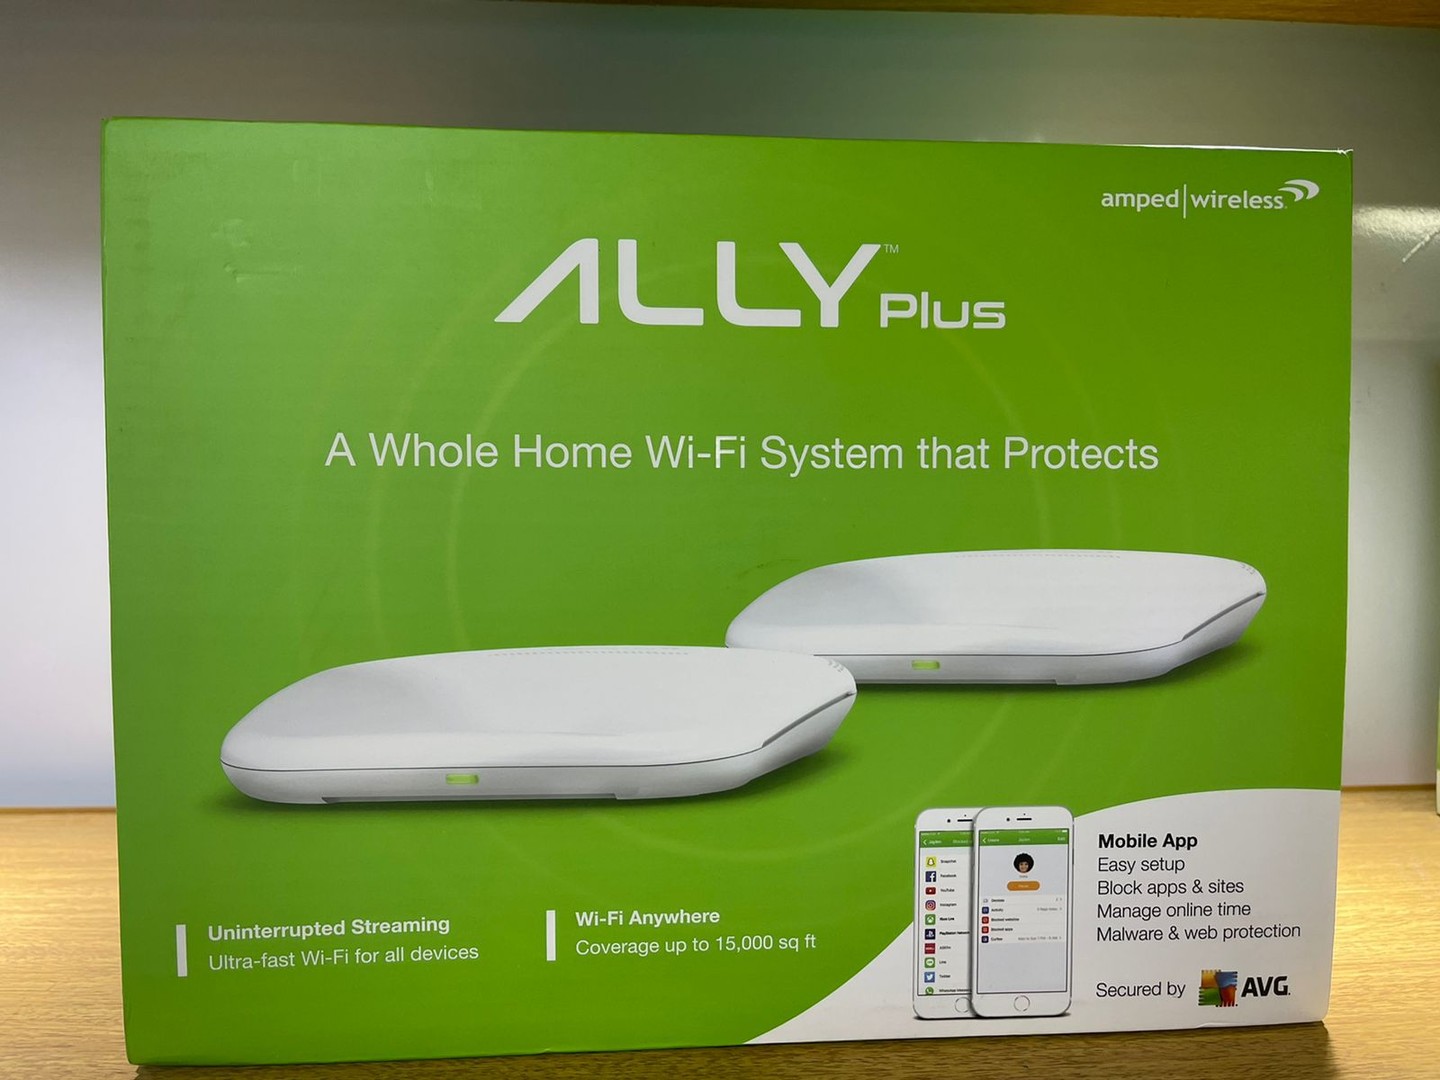 accesorios para electronica - ROUTER / EXTENDER SMART WI-FI (ALLY-0091 K) ALLY PLUS AMPED